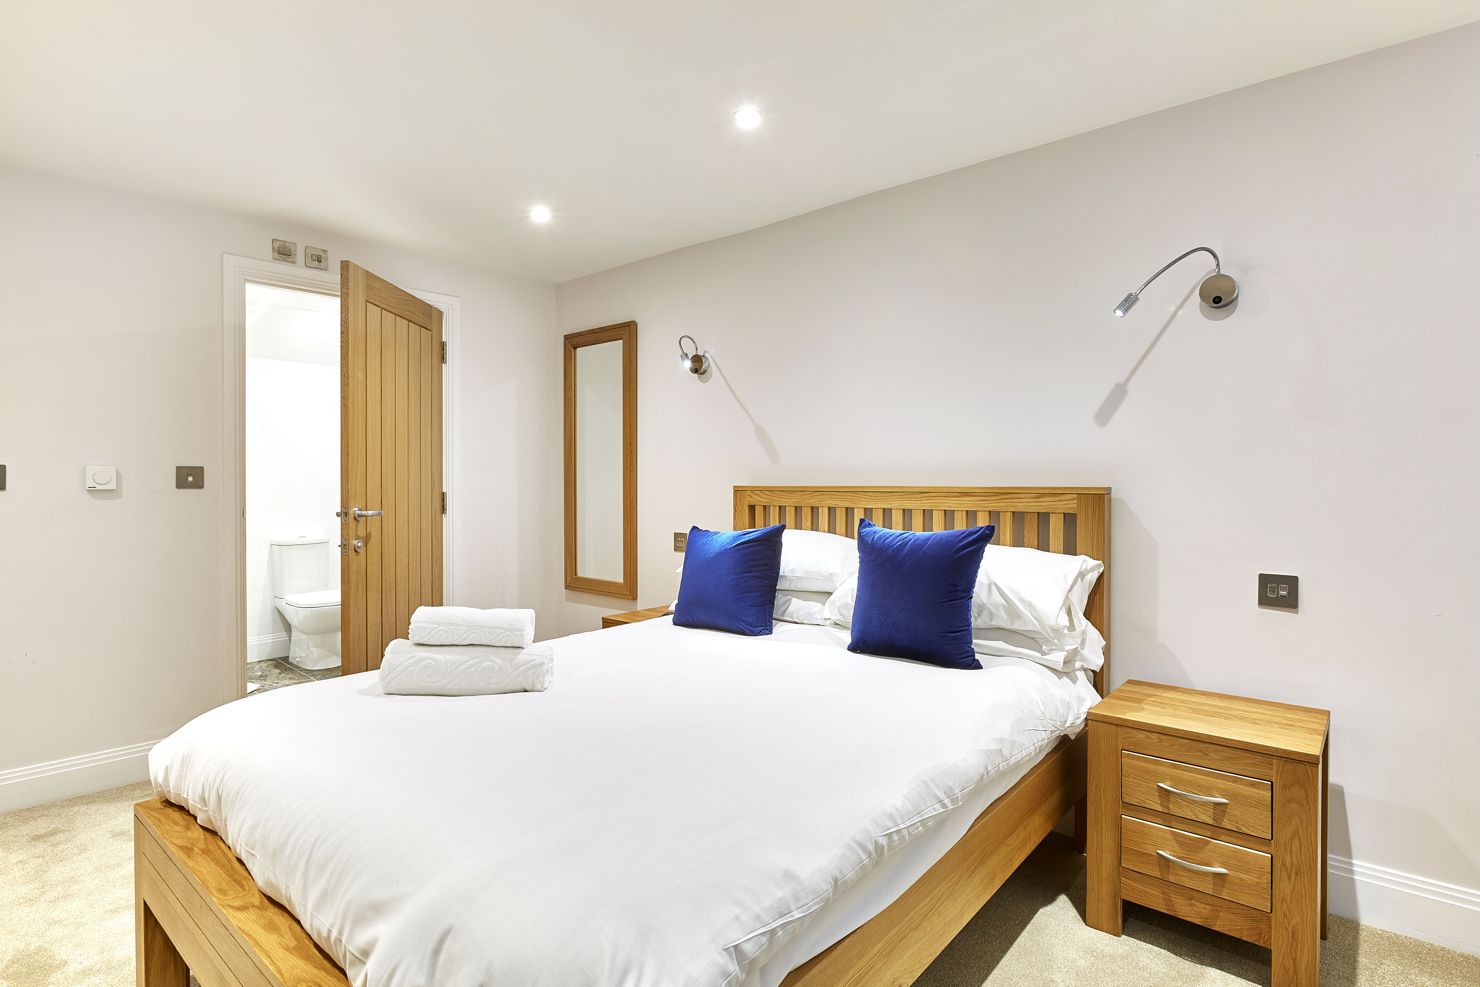 Amazing-Self-Catering-Accommodation-Newbury!-Centrally-located-Serviced-Apartments-Newbury-and-corporate-accommodation-UK.-Competitive-Rates-·-No-Booking-Fees-·-Free-Wi-Fi-·-Fully-Furnished-·-Fully-equipped-kitchen-·-Weekly-cleaning-included.-Call-Urban-Stay-now:-+44-(0)-208-691-3920